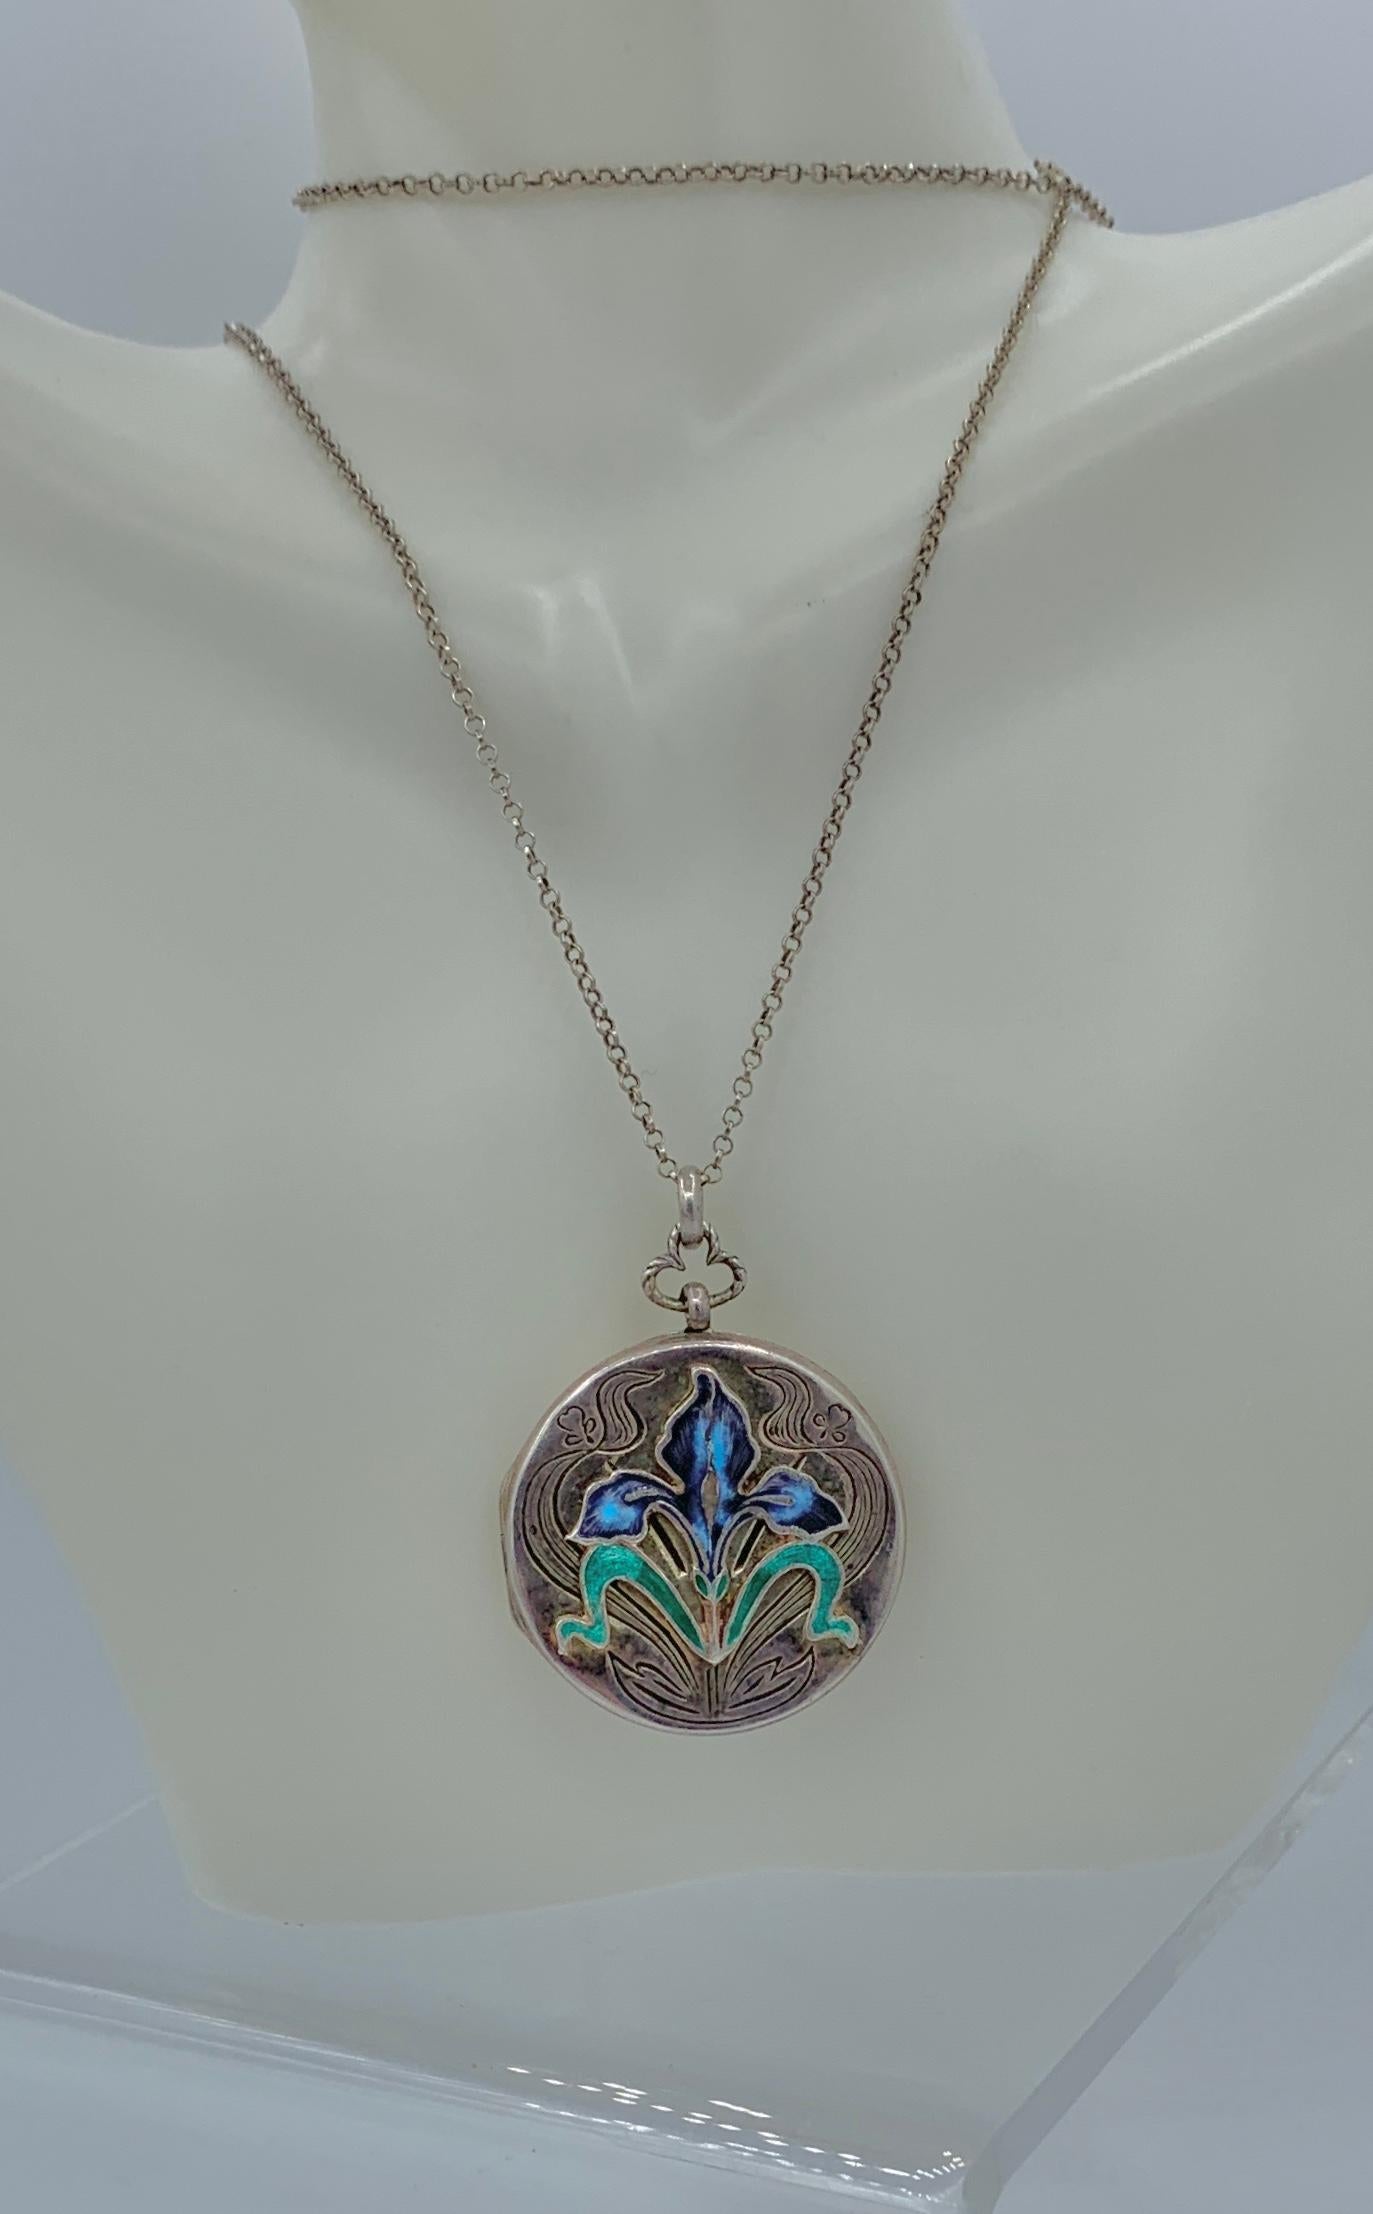 Enamel Iris Flower Locket Necklace Antique Art Nouveau Sterling Silver AML In Good Condition For Sale In New York, NY